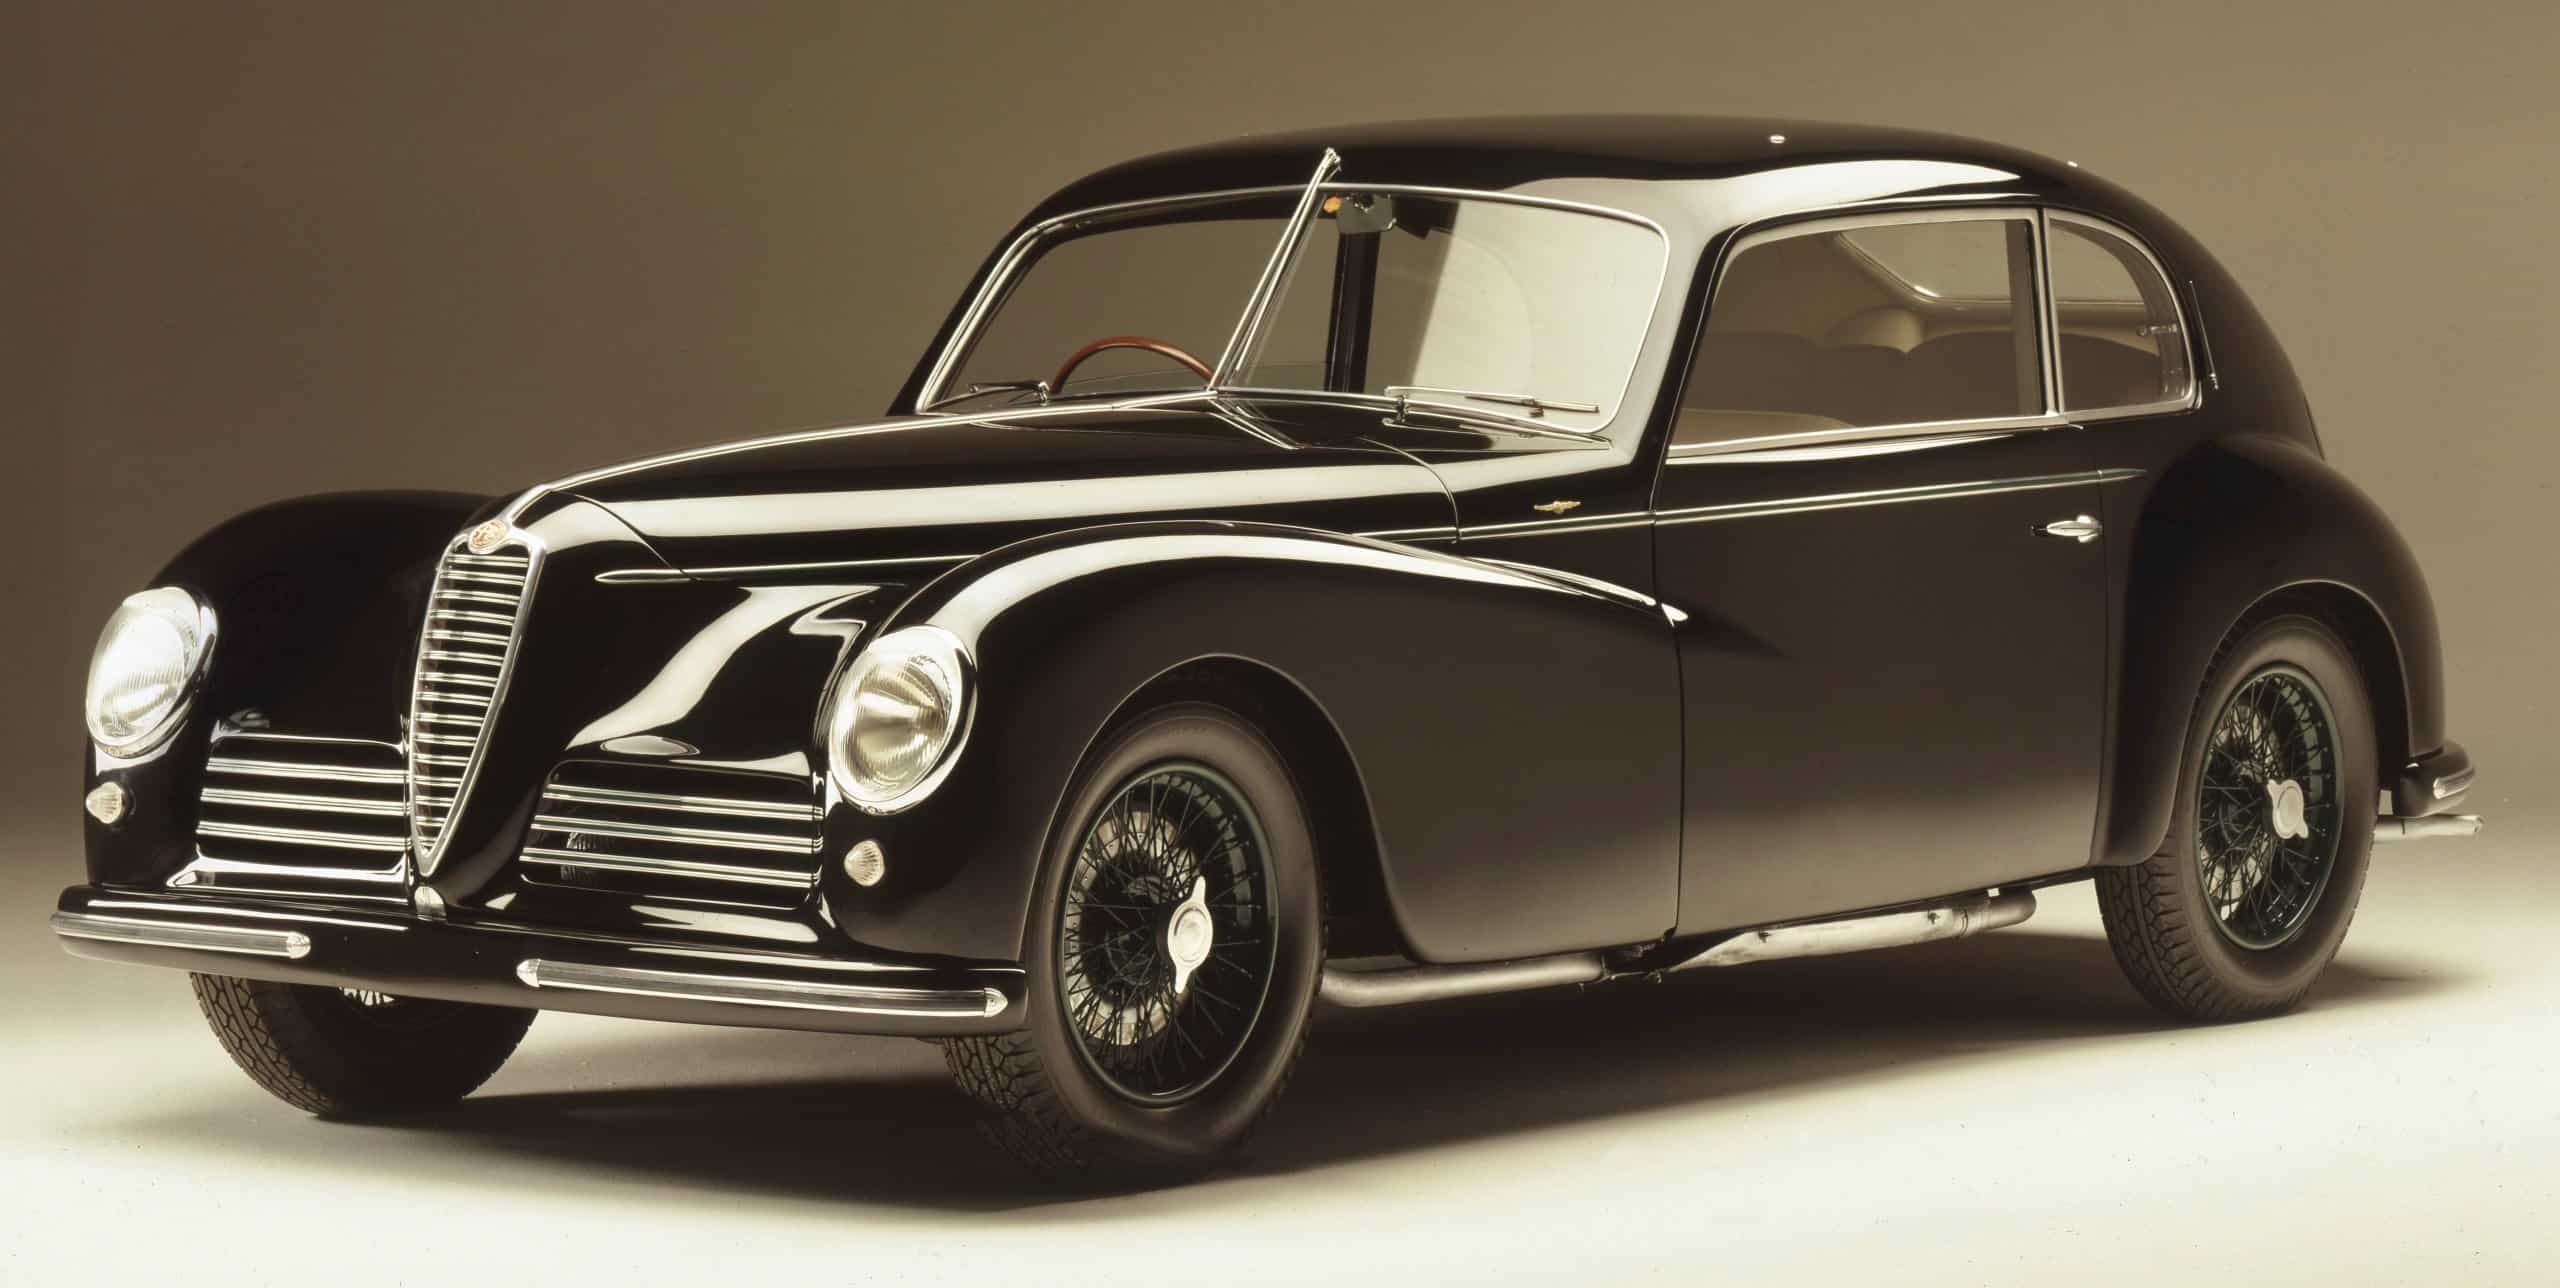 Alfa 6C 2500, Alfa 6C 2500 encapsulates transition from artisan to industrial production, ClassicCars.com Journal